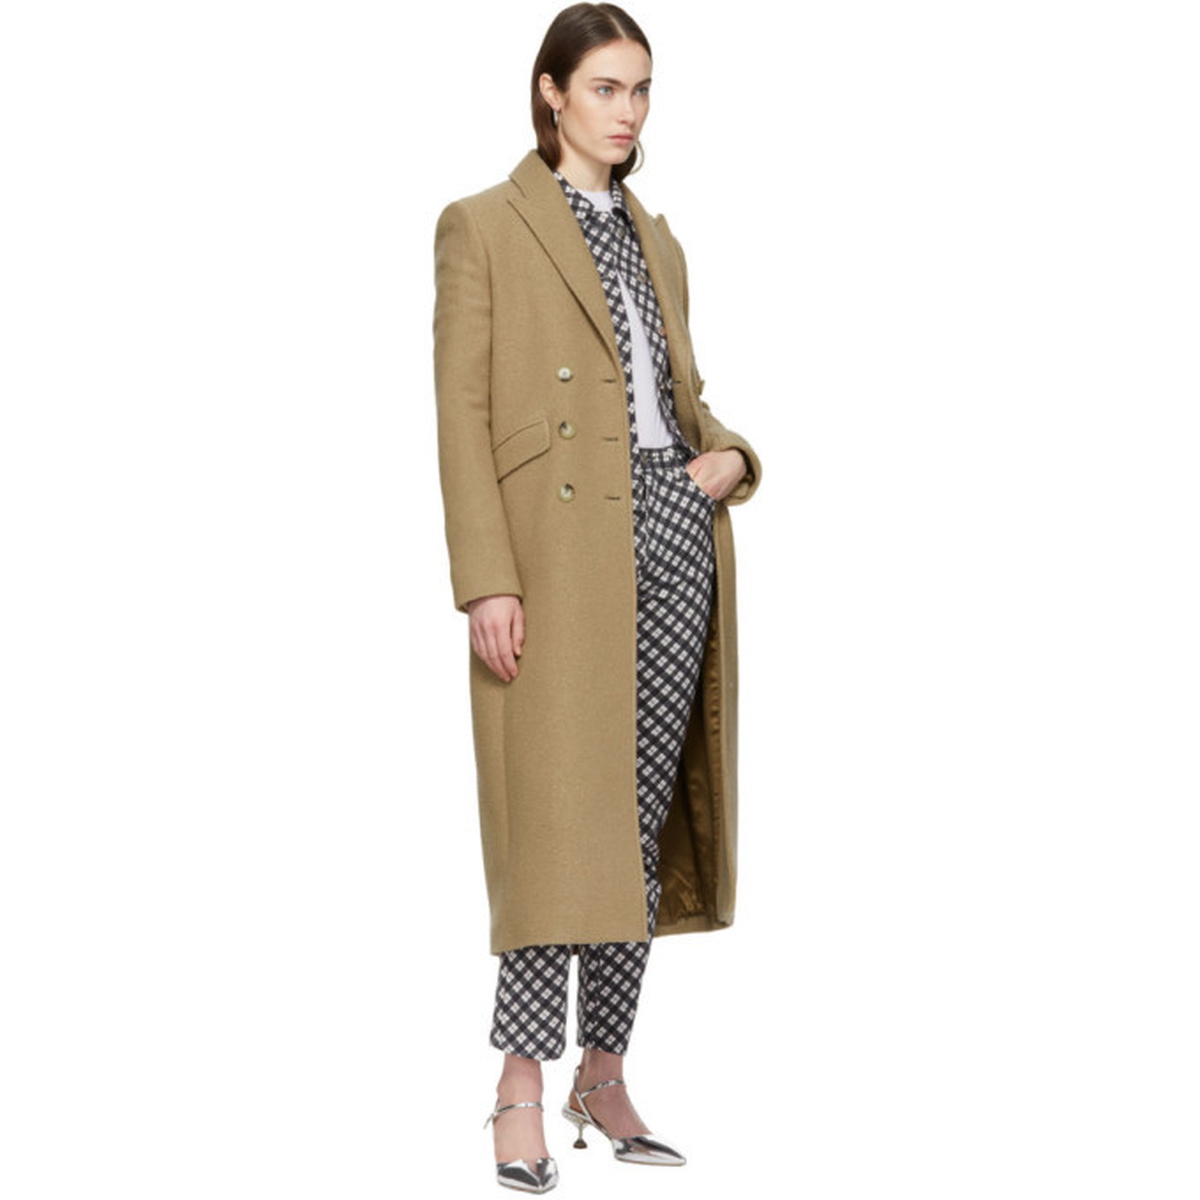 Alexachung Tan Double-Breasted Tailored Coat Alexachung